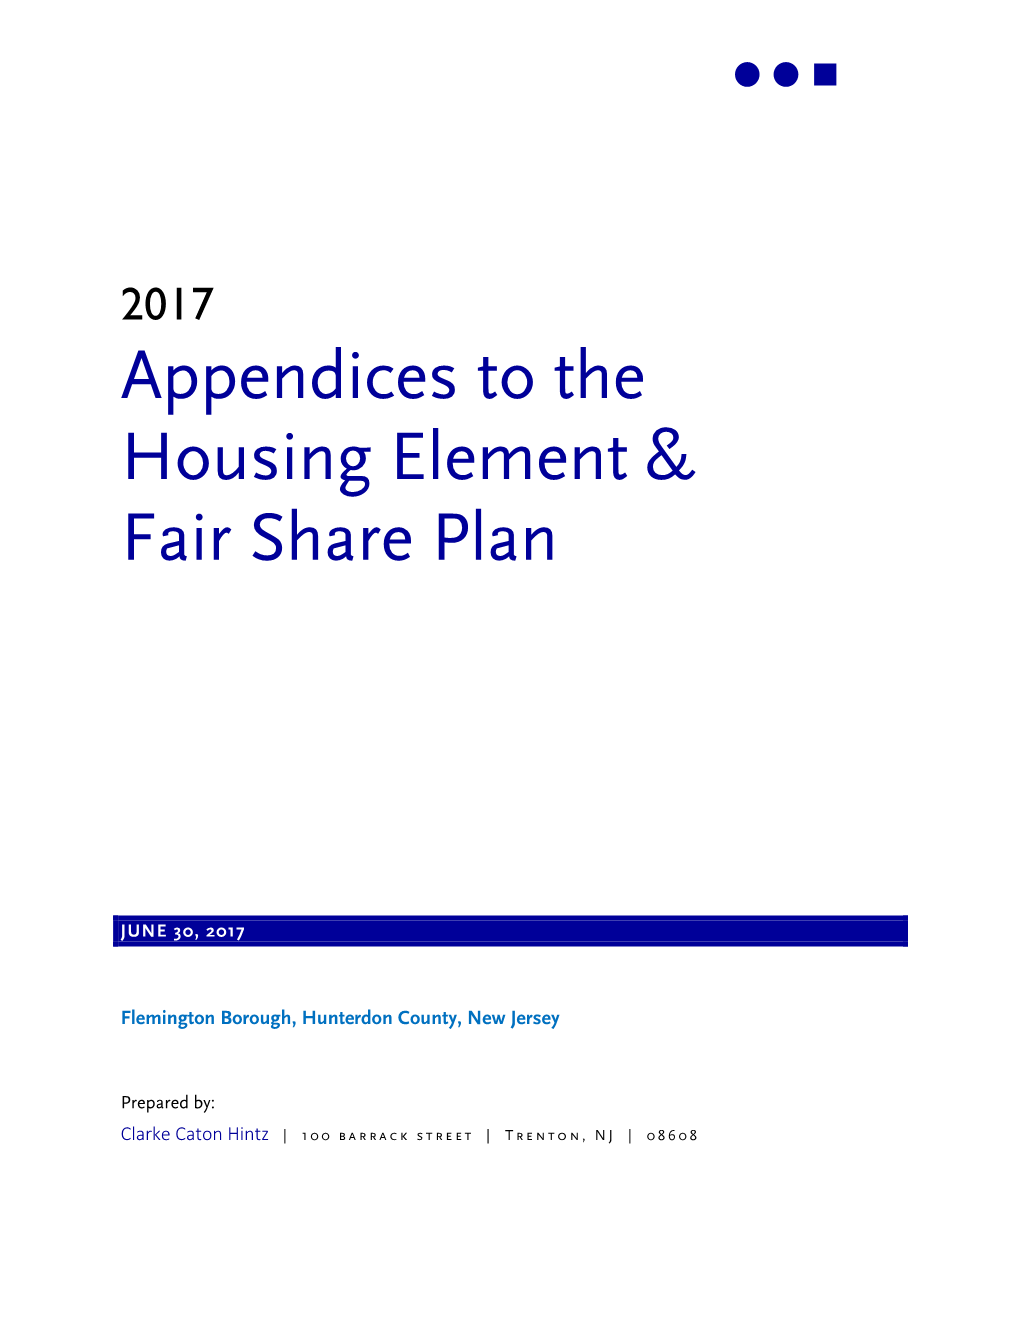 2017 Appendices to the Housing Element & Fair Share Plan